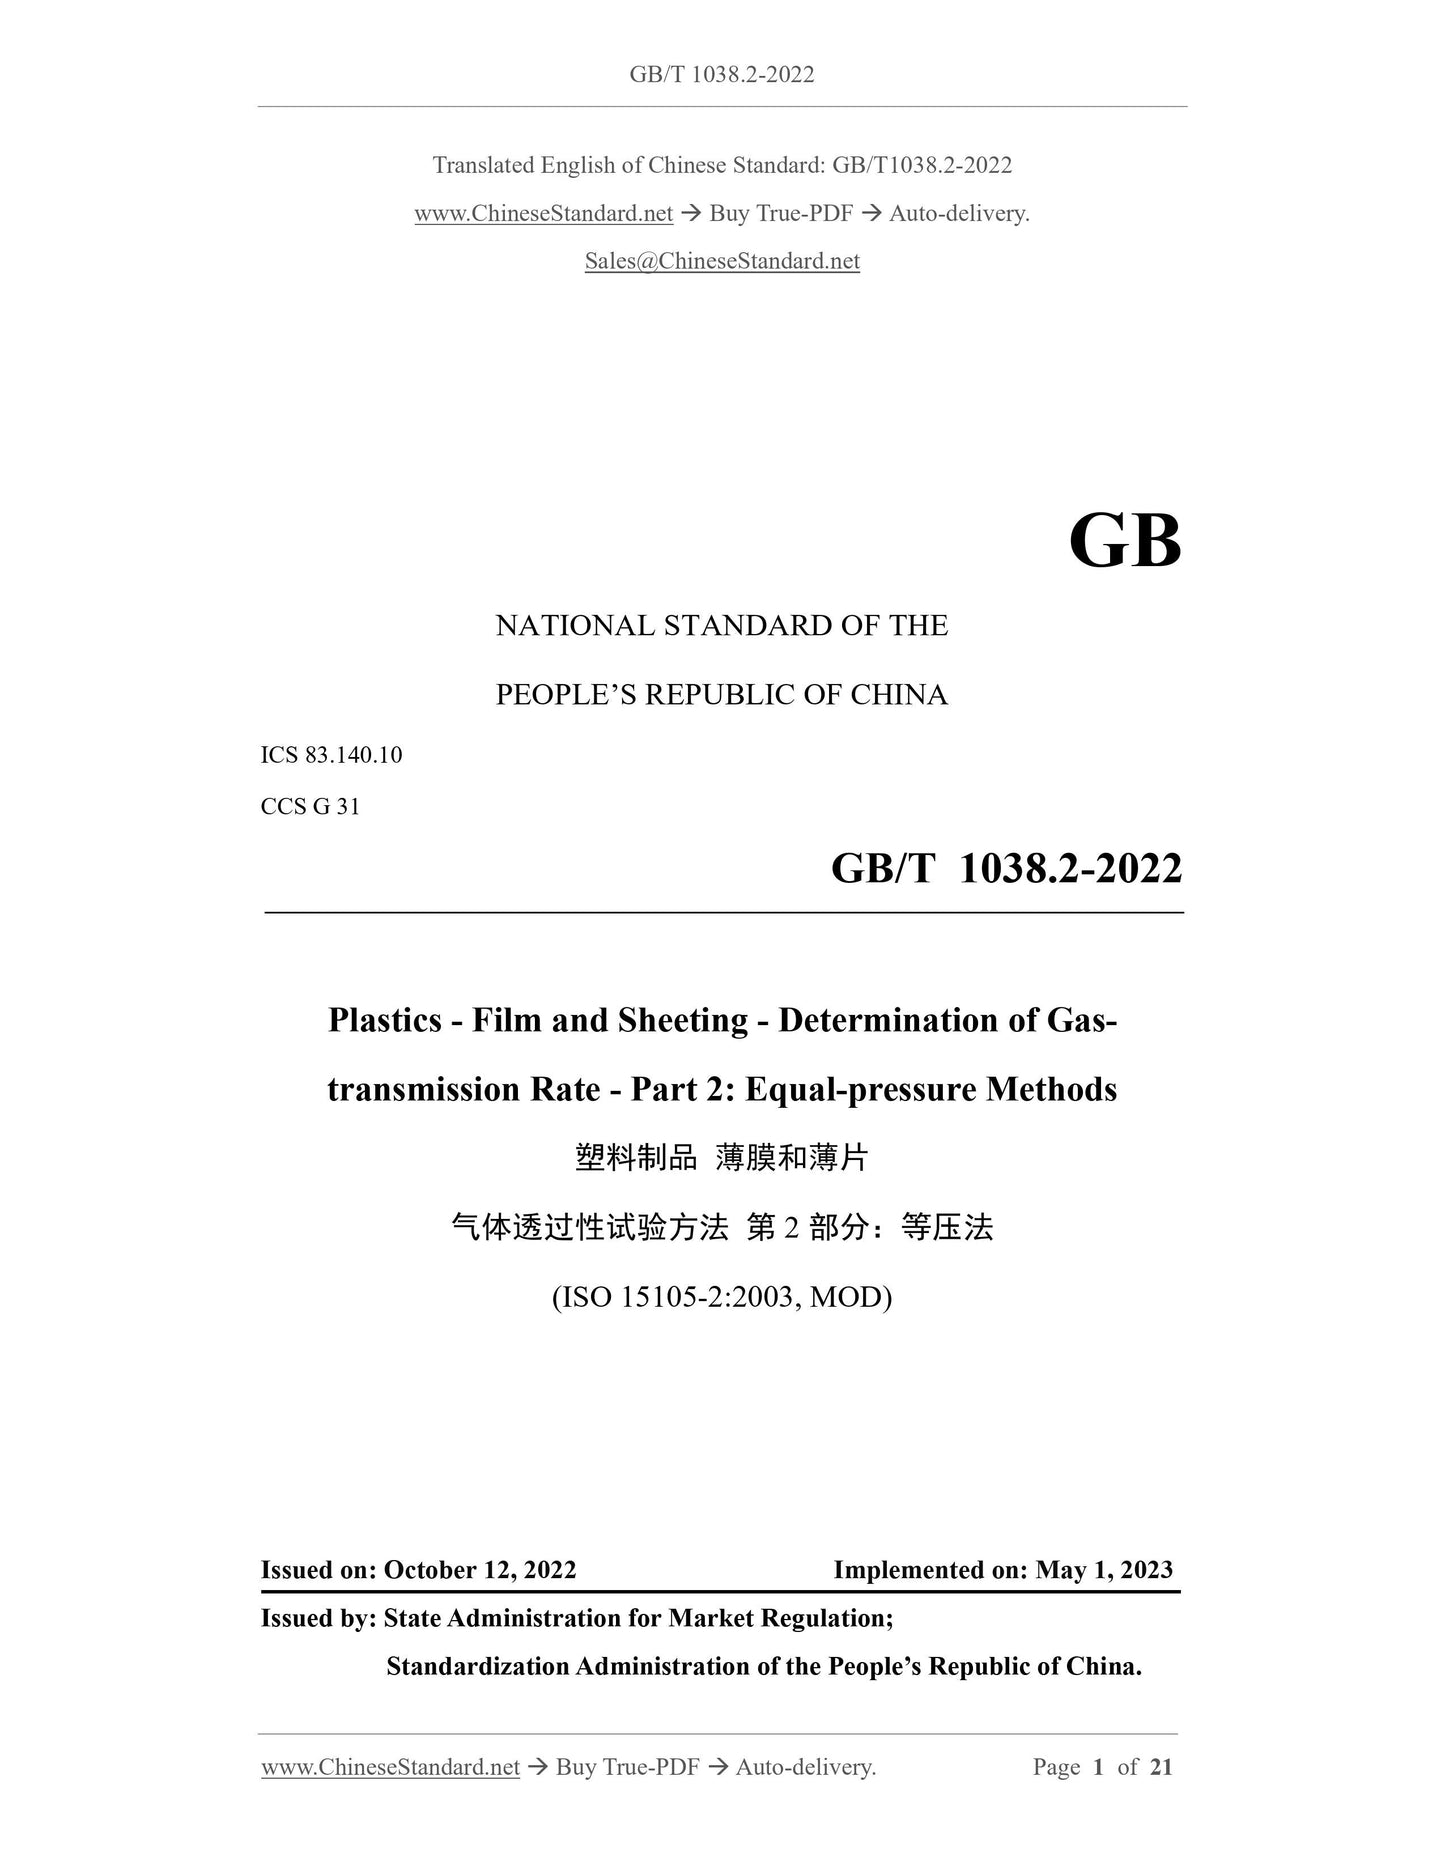 GB/T 1038.2-2022 Page 1